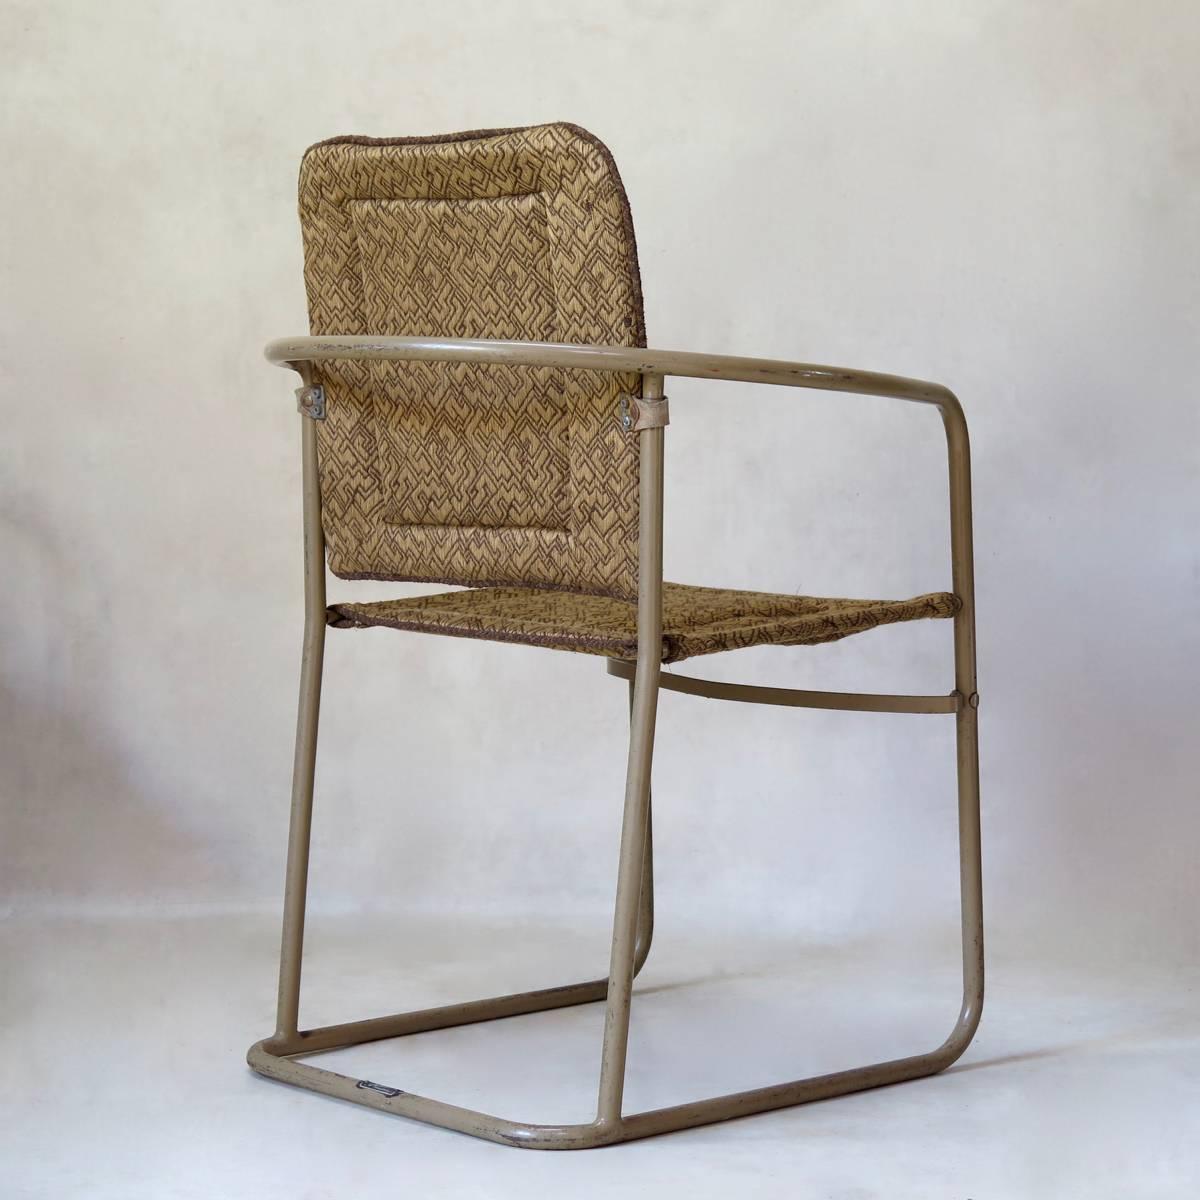 20th Century Pair of Tubular Metal Chairs, France, circa 1950s For Sale